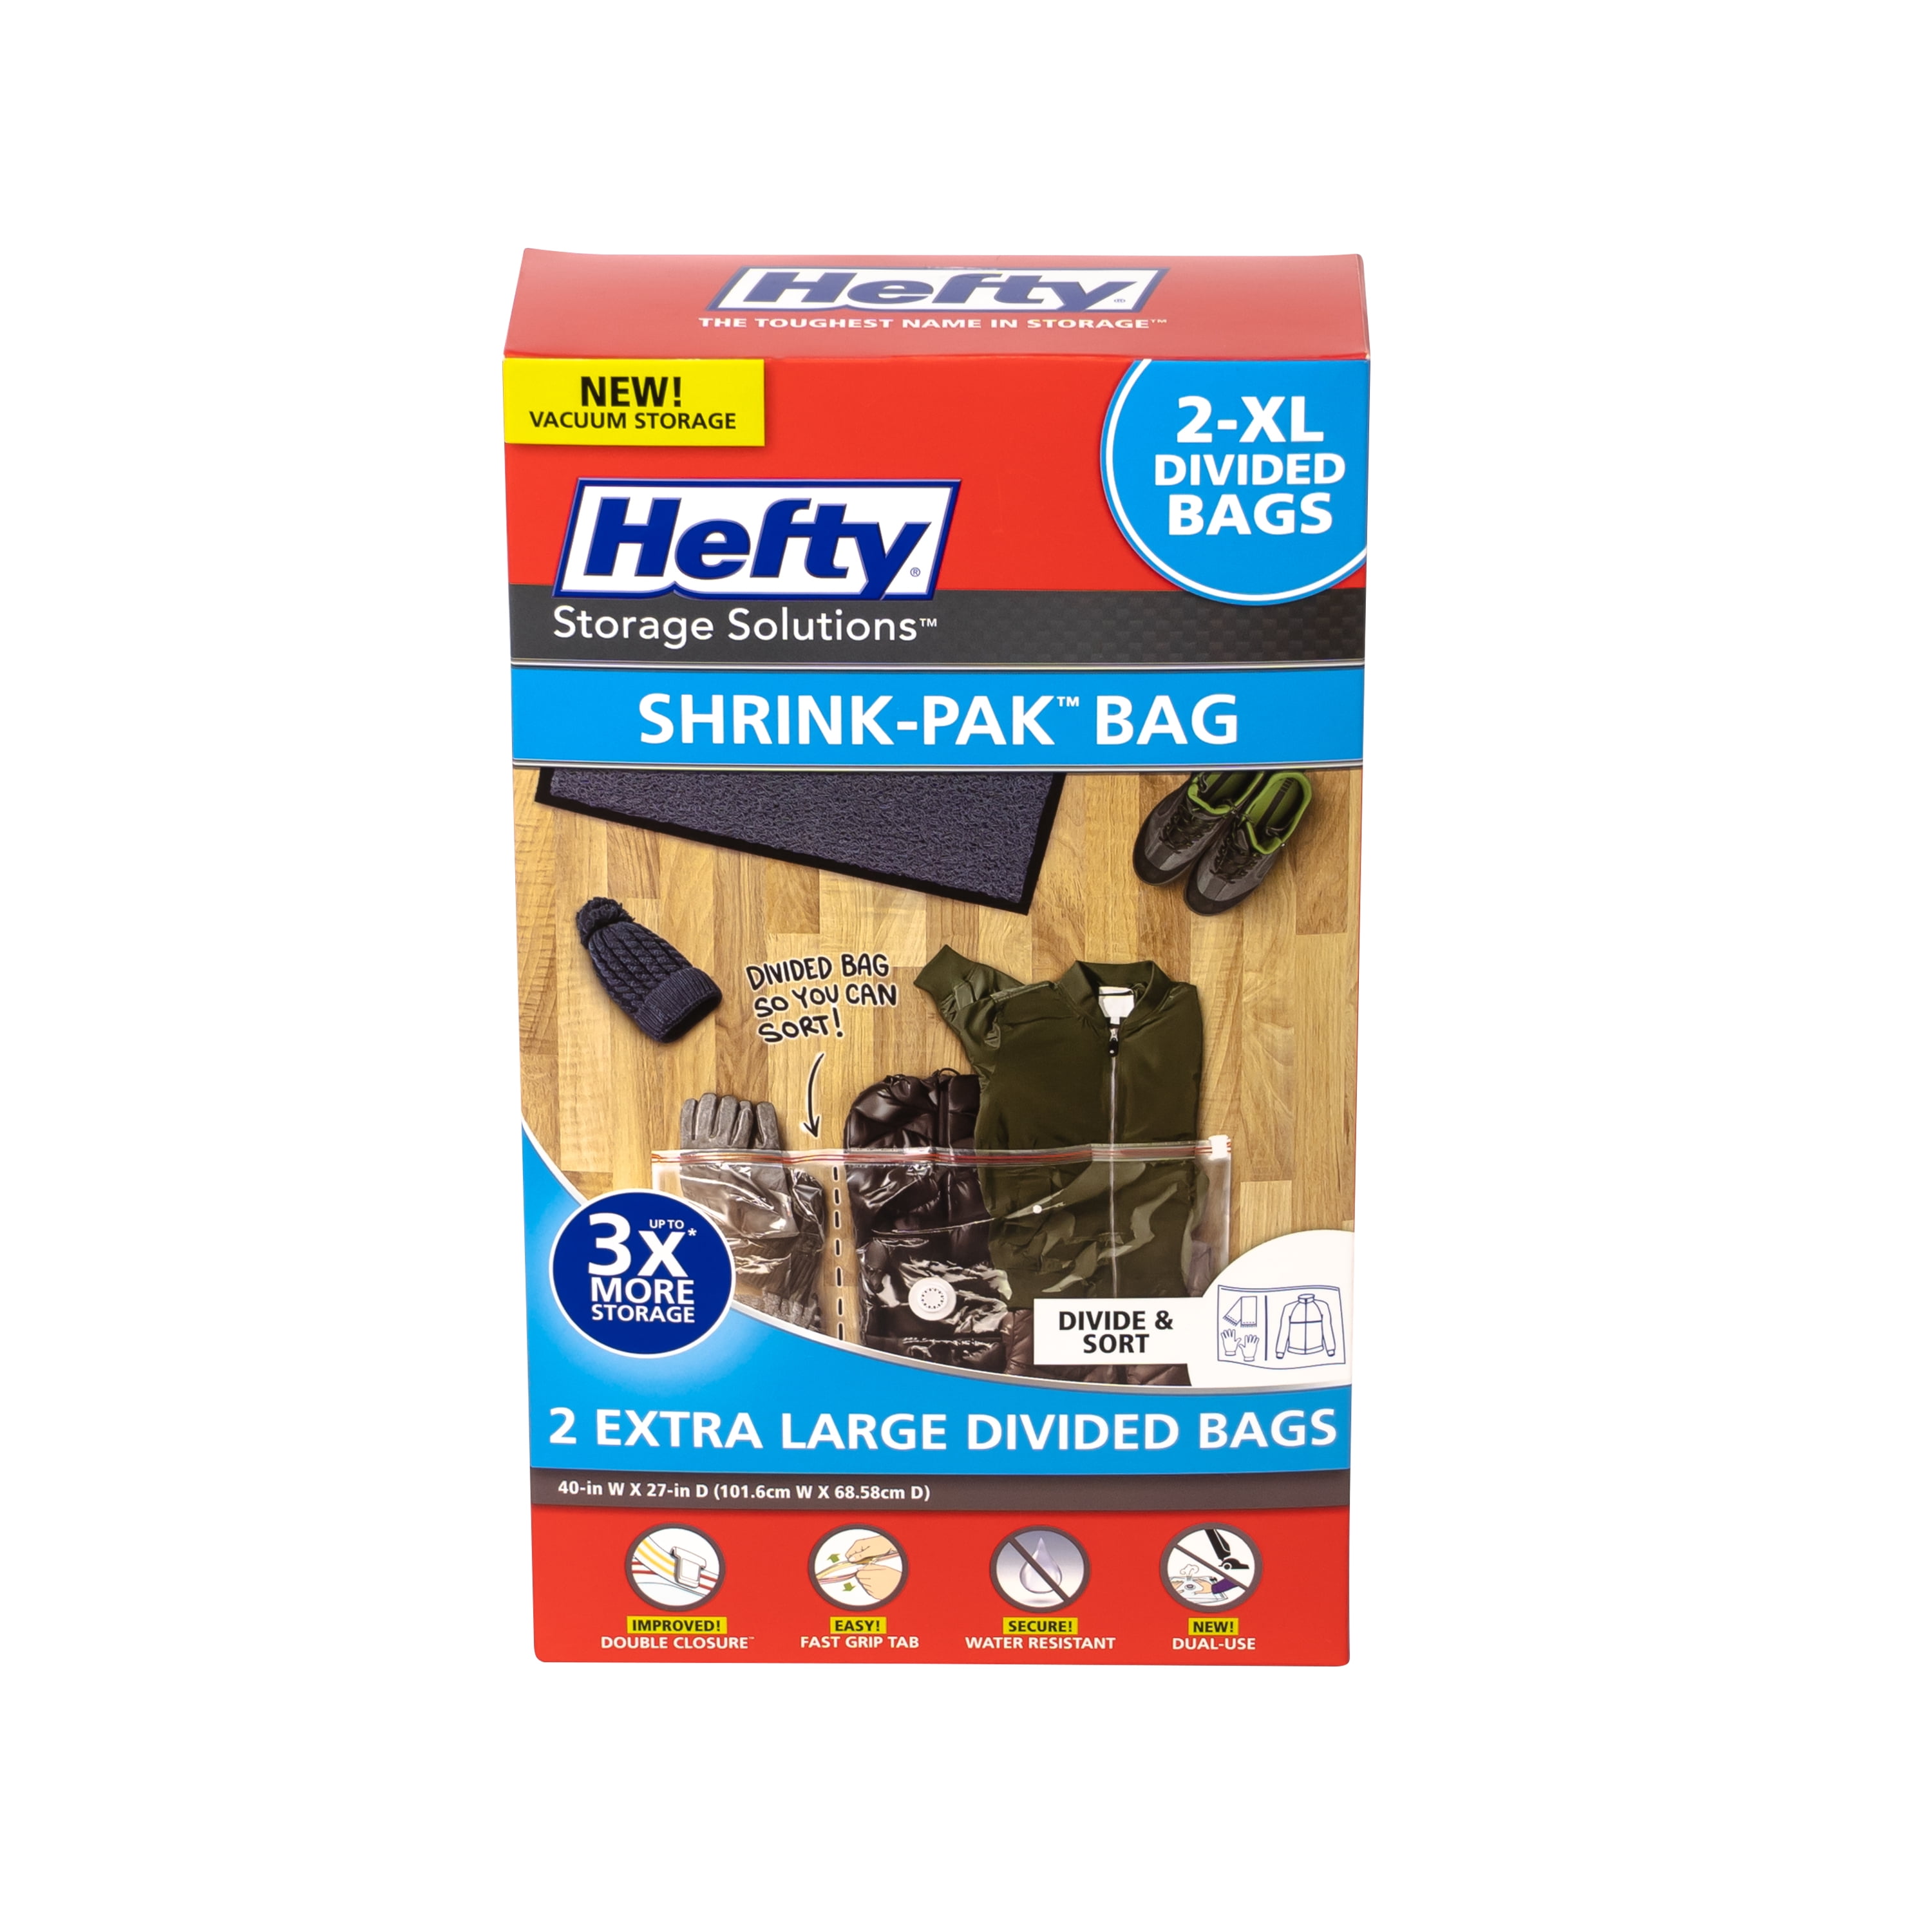 Hefty Storage Solutions Shrink Pak Bags 2 Total Large Divided Bags